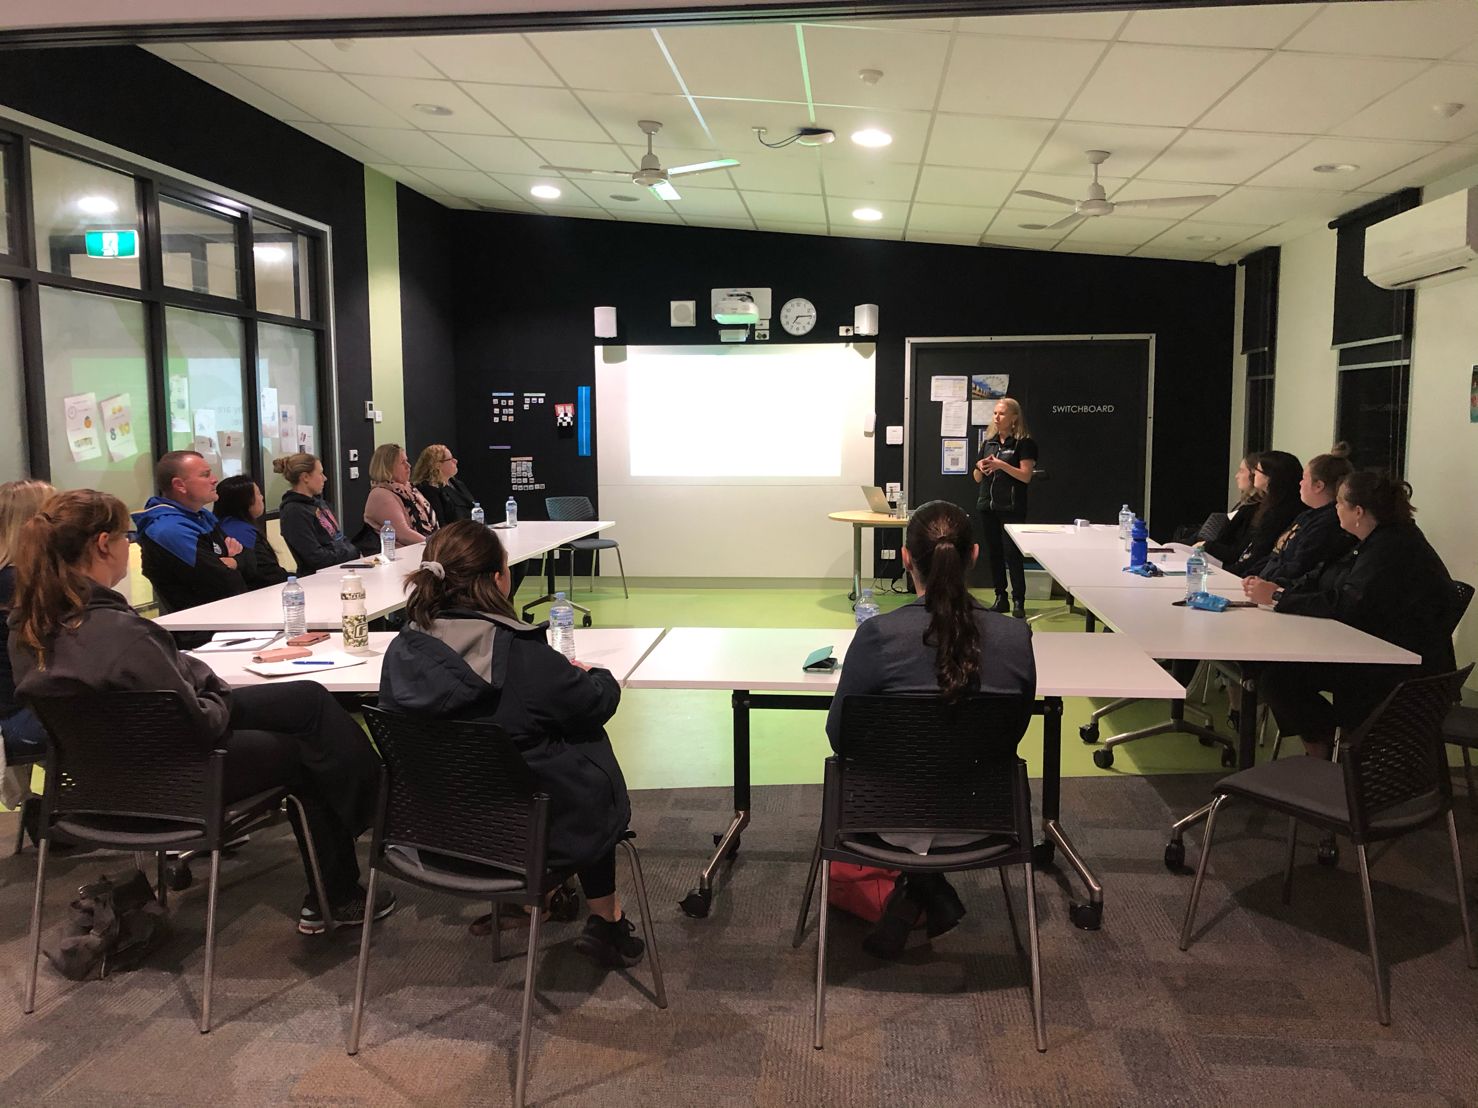 Sports Development workshops in partnership with Cardinia Shire Council